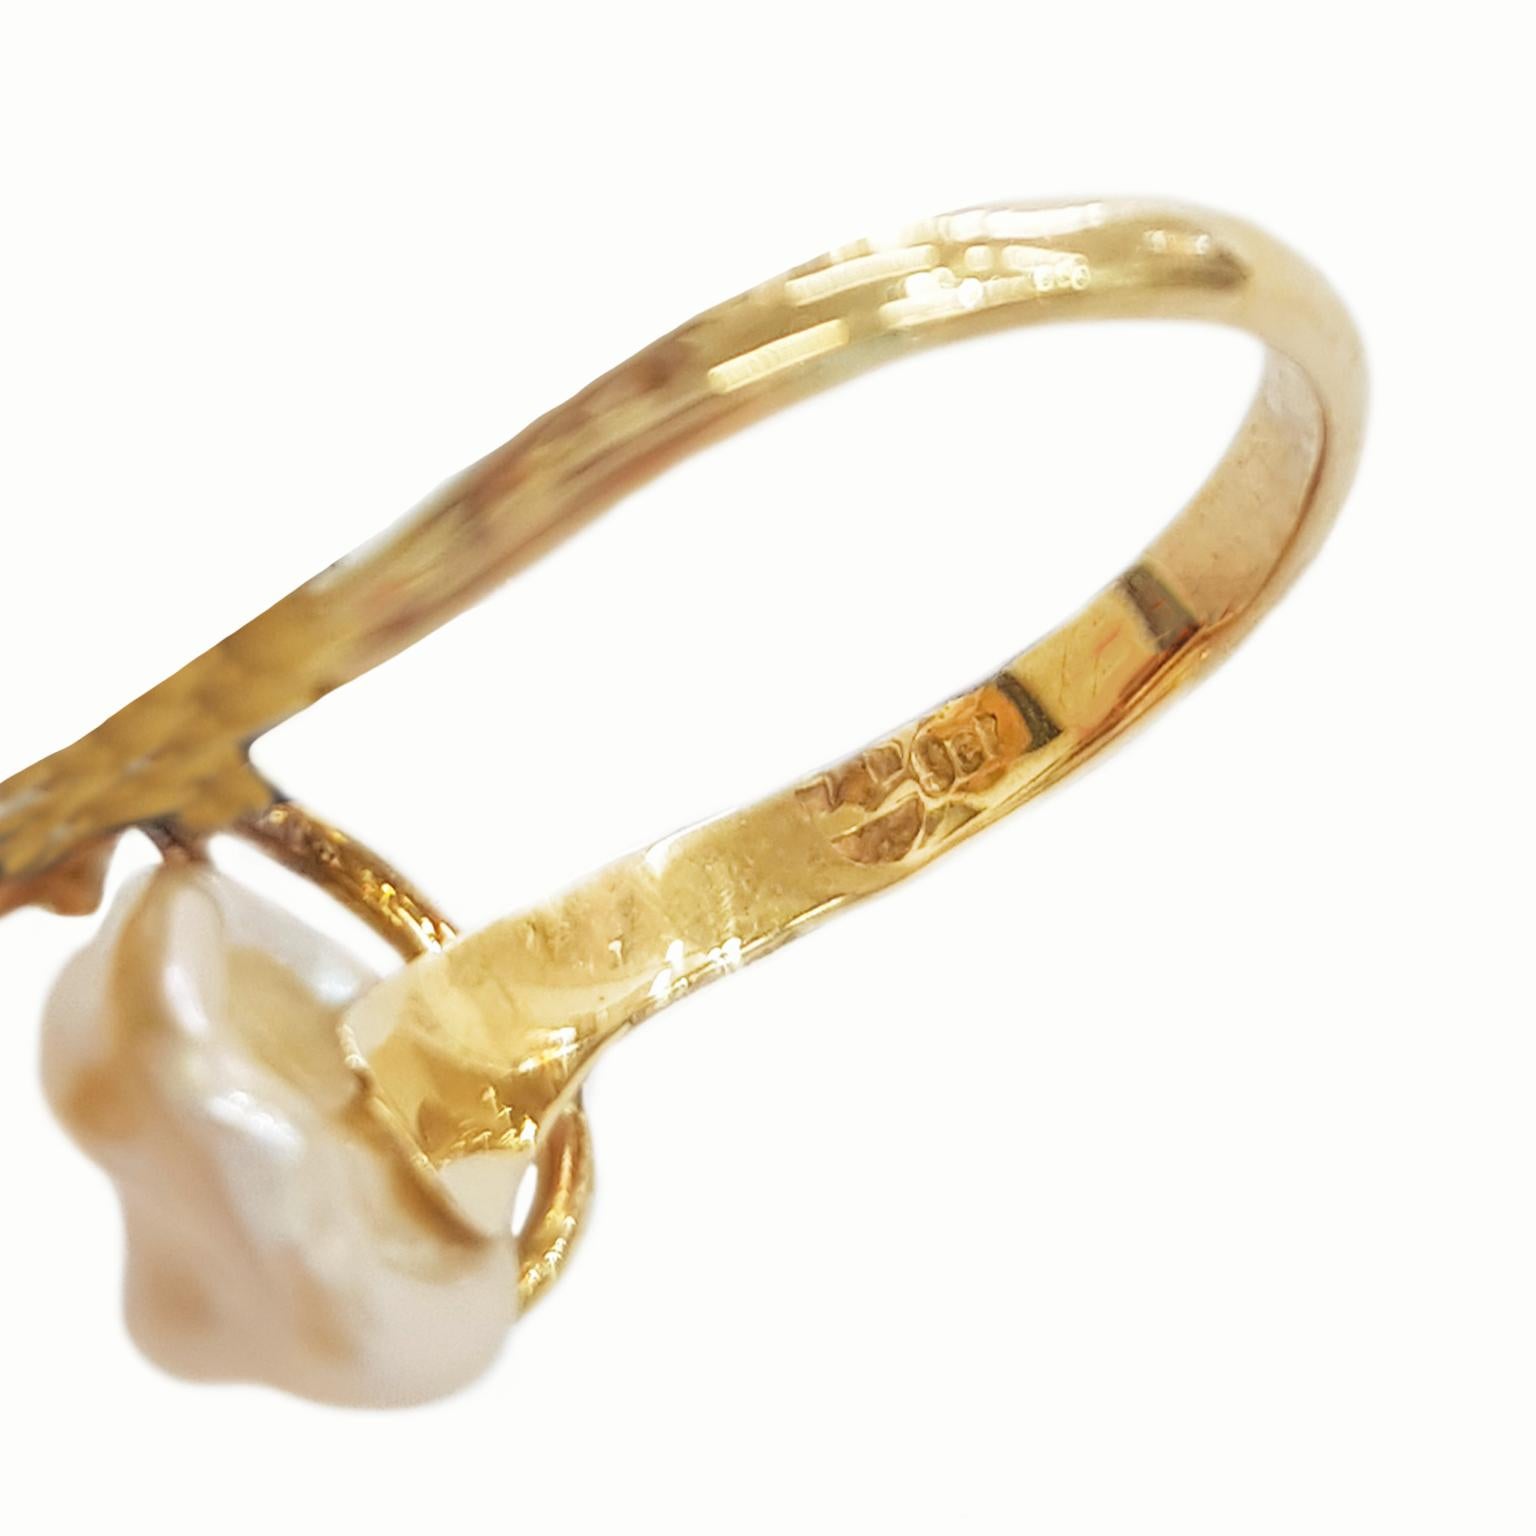 Step into a world of timeless elegance with Paul Amey’s “Dimple” Pearl Ring – a truly unique and handcrafted masterpiece that seamlessly marries the warmth of 9K yellow gold with the lustrous beauty of a natural freshwater pearl.

The focal point of